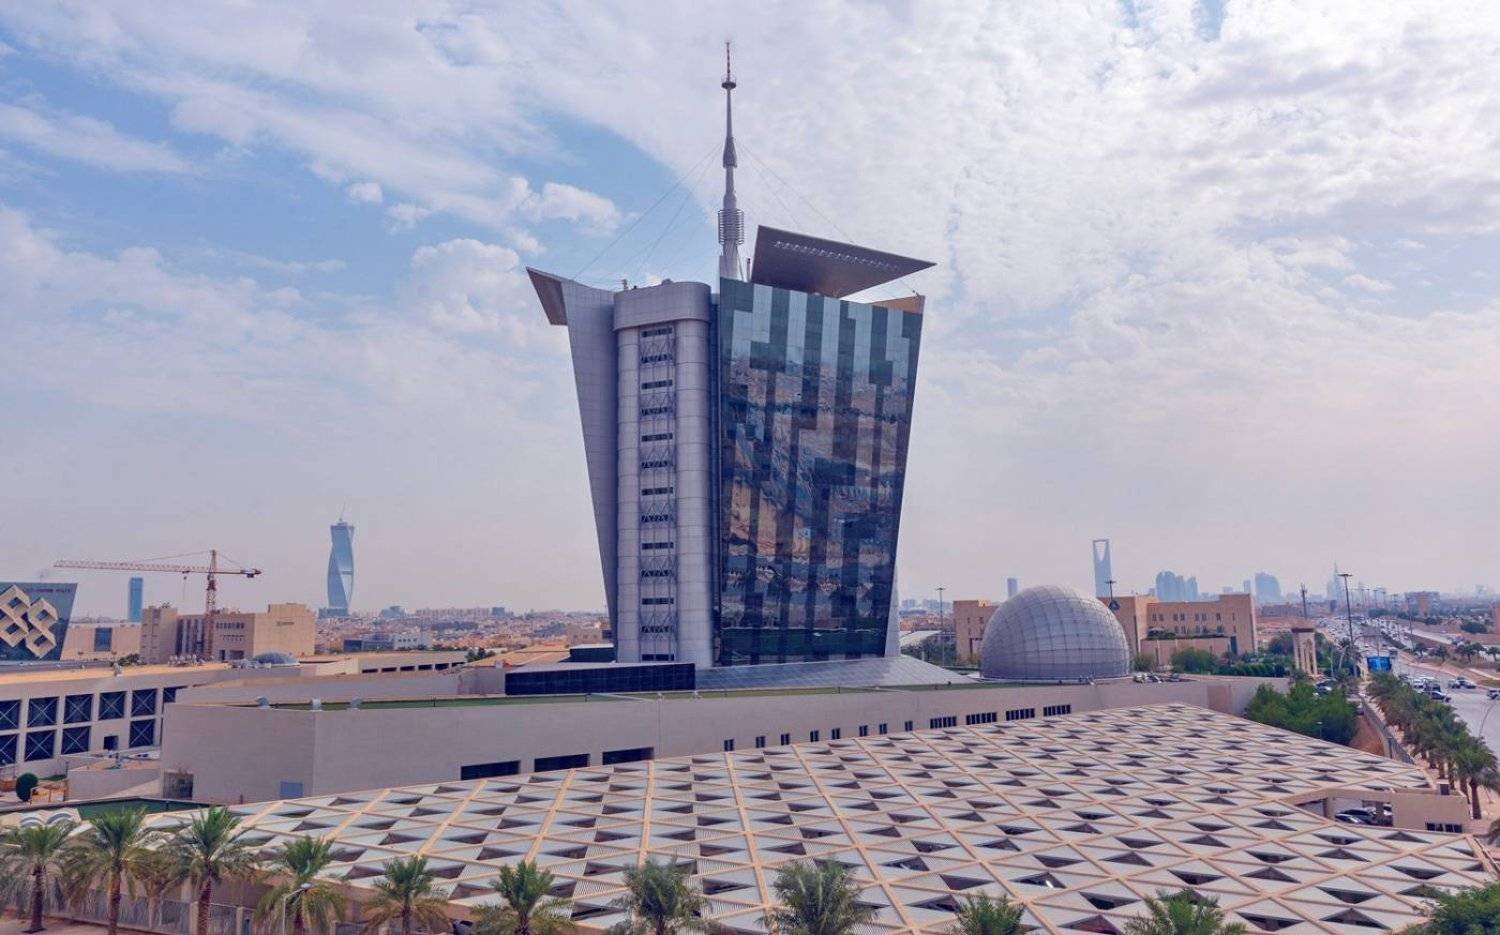 The Saudi Communications, Space and Technology Commission building in Riyadh (the Commission’s website)